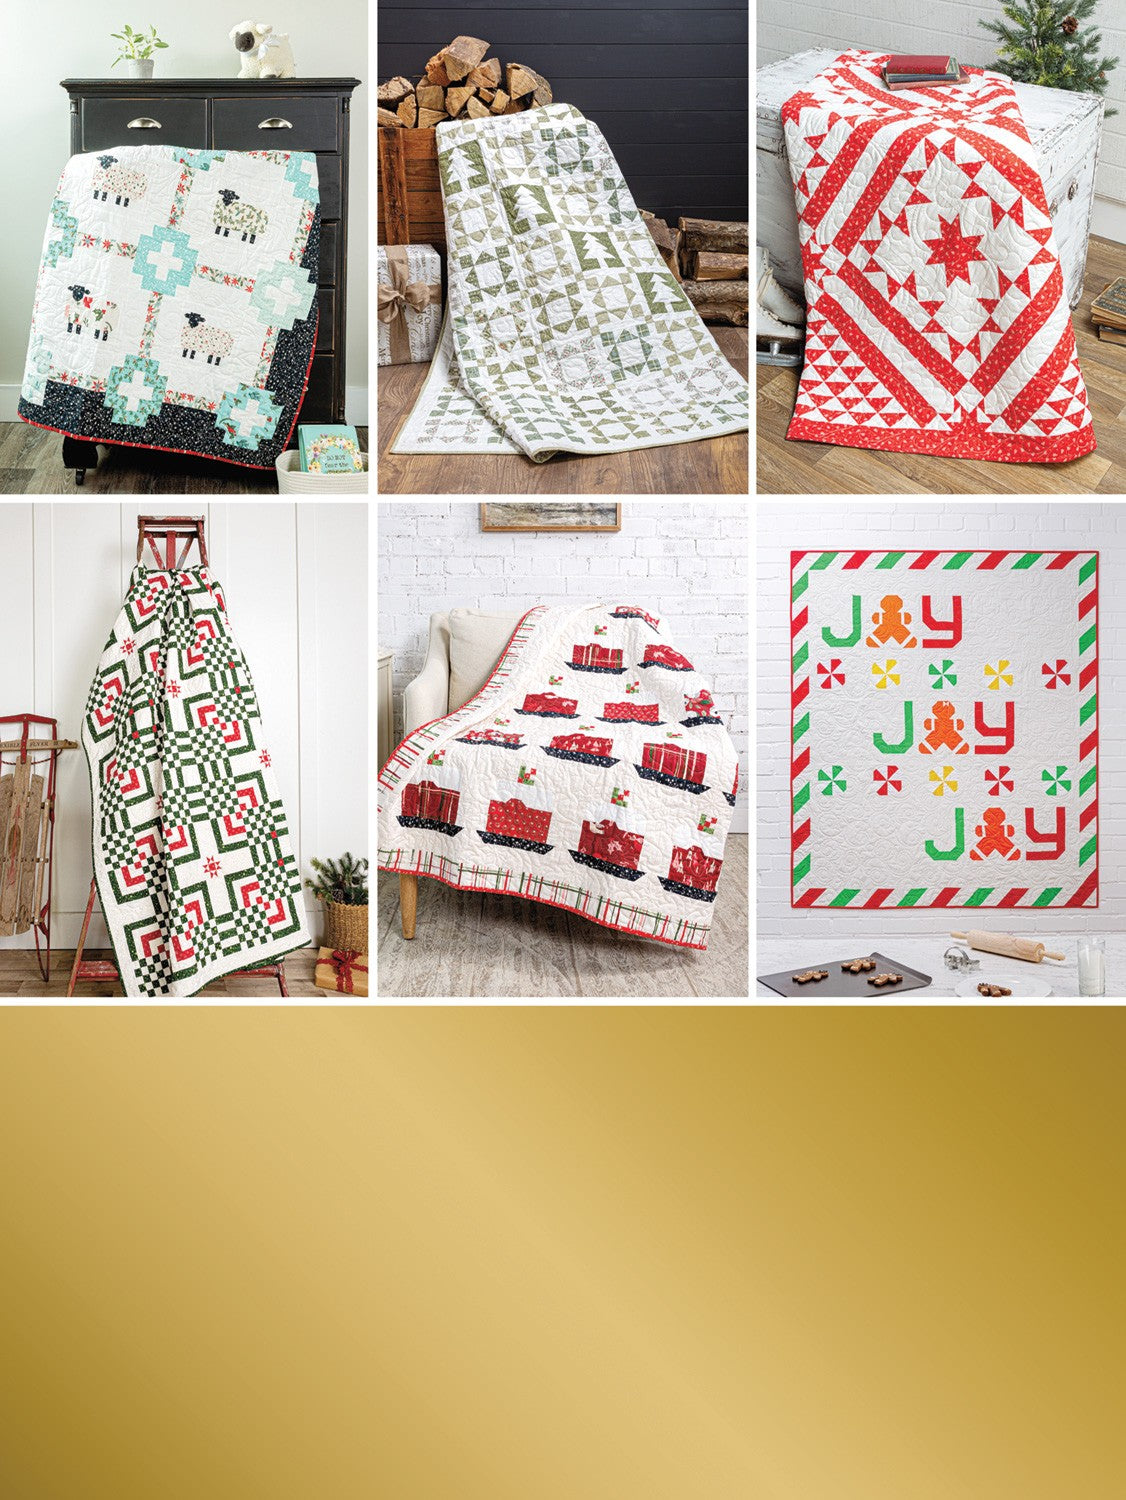 Annie's Christmas Quilting with Wendy Sheppard